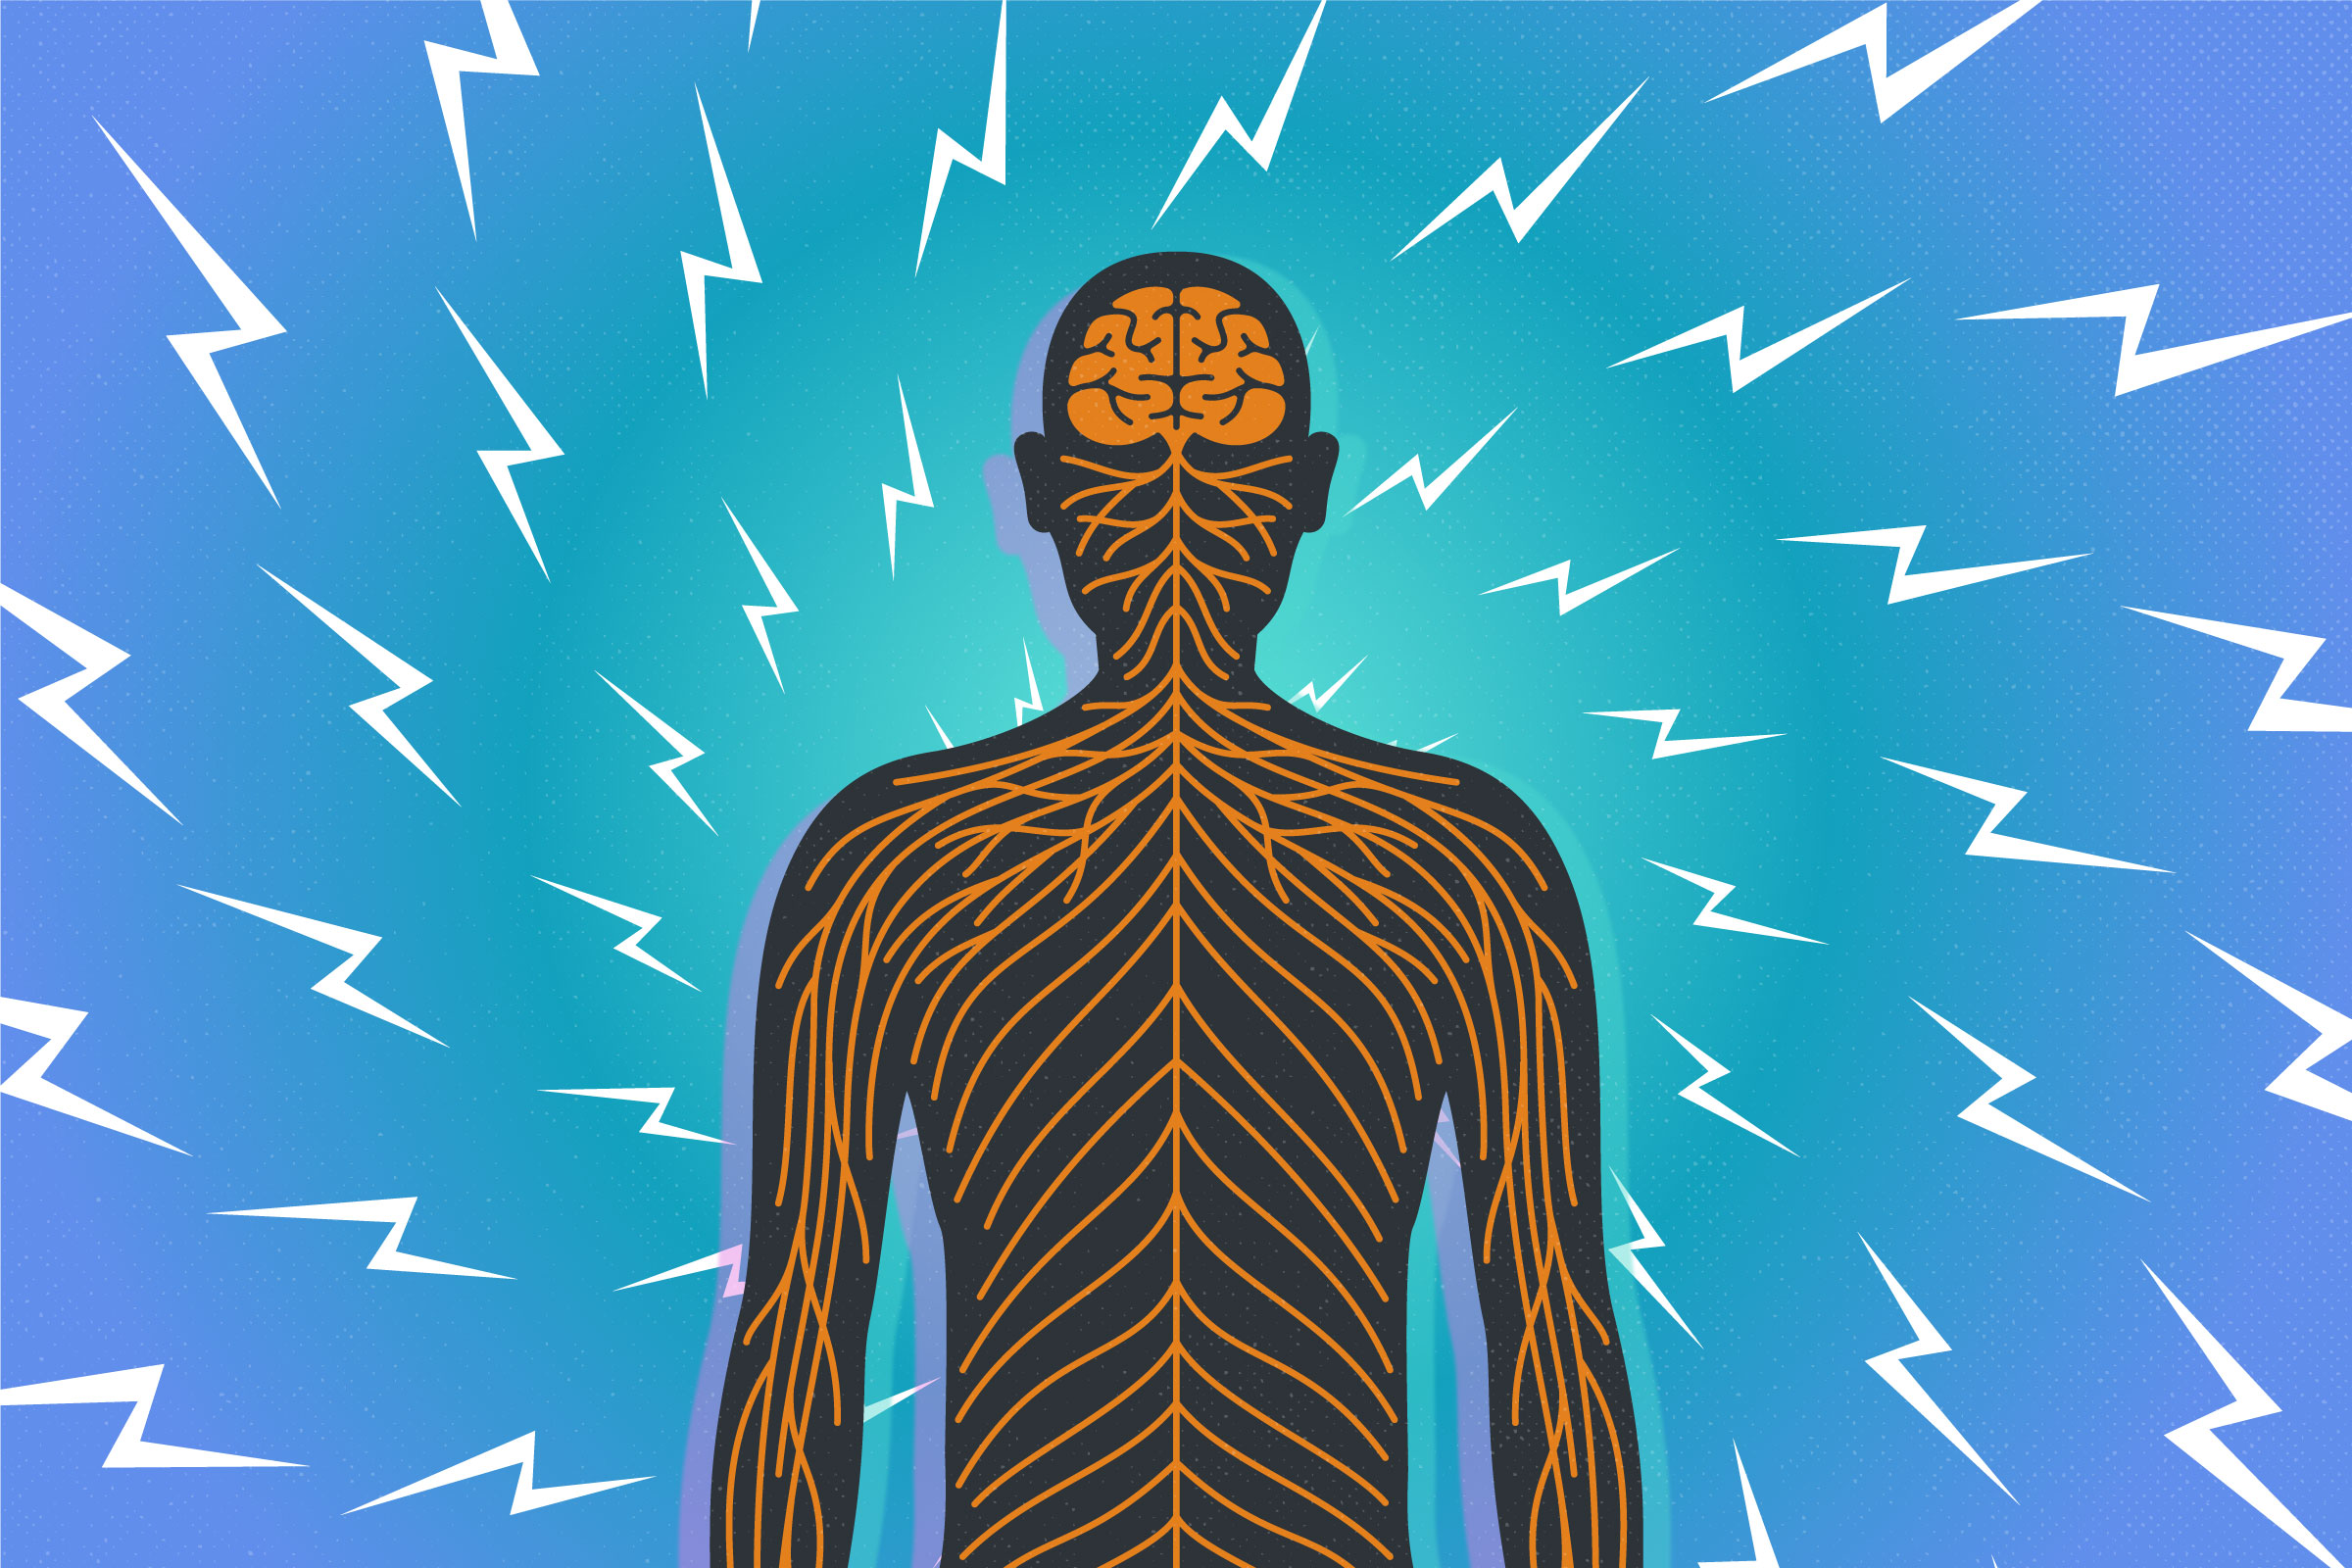 Black human shape with image of brain and nervous system overlaid in orange. Blue background with white lightning bolts.